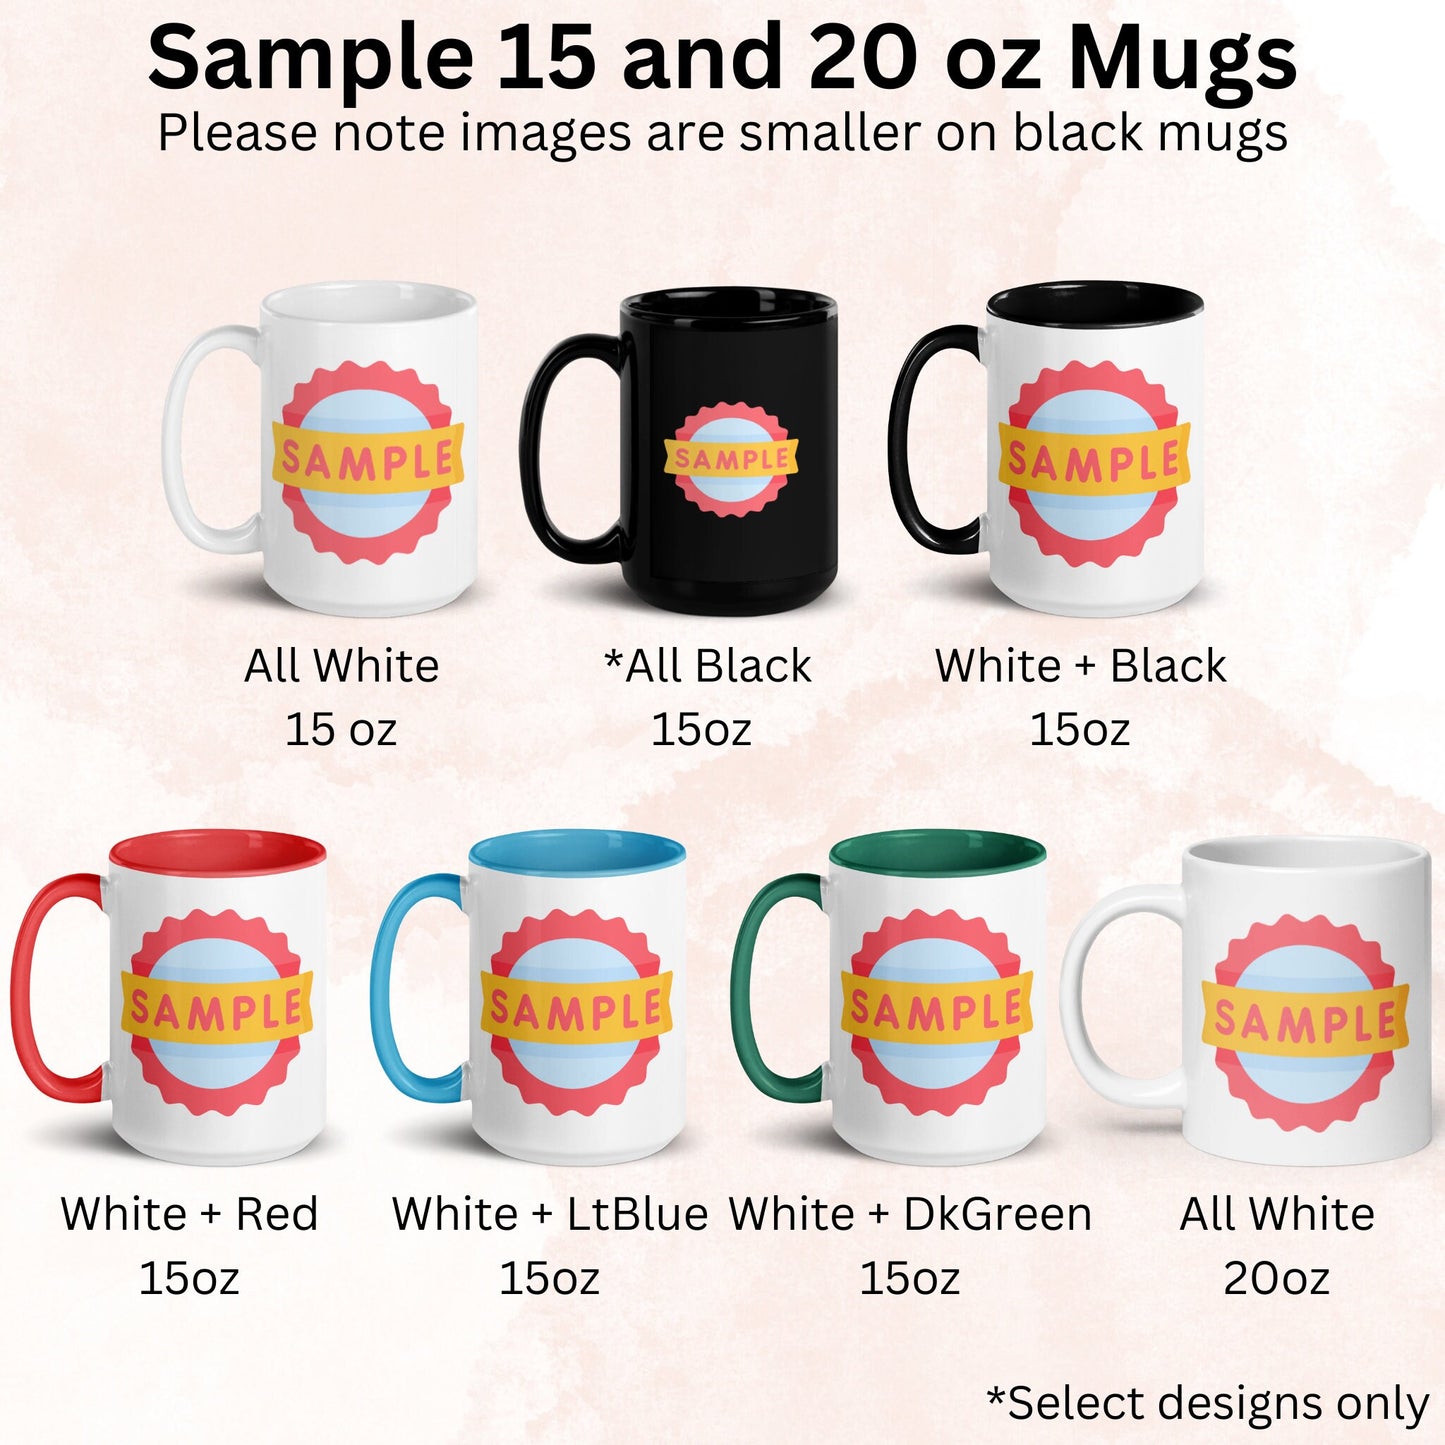 Your Crazy is Showing Mug, You Might Want to Tuck That Back In Mug - Zehnaria - FUNNY HUMOR - Mugs